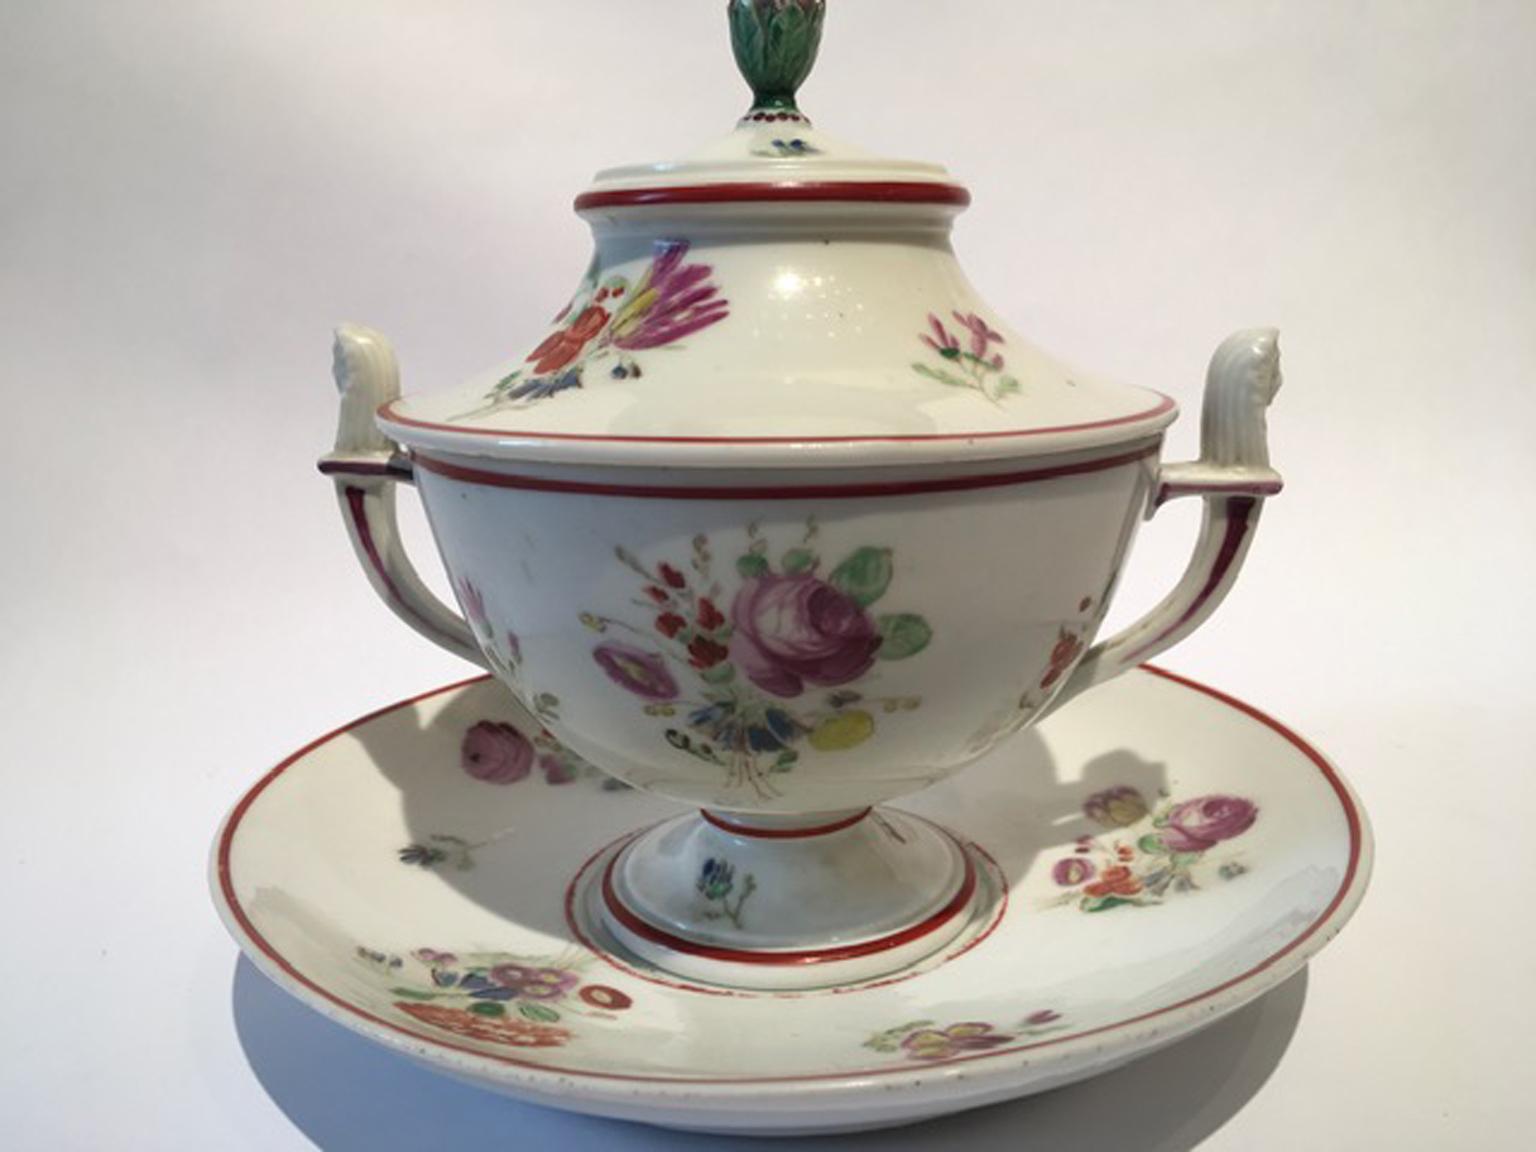 Italy 18th Century Richard Ginori Porcelain Sugar Bowl with Cover For Sale 8